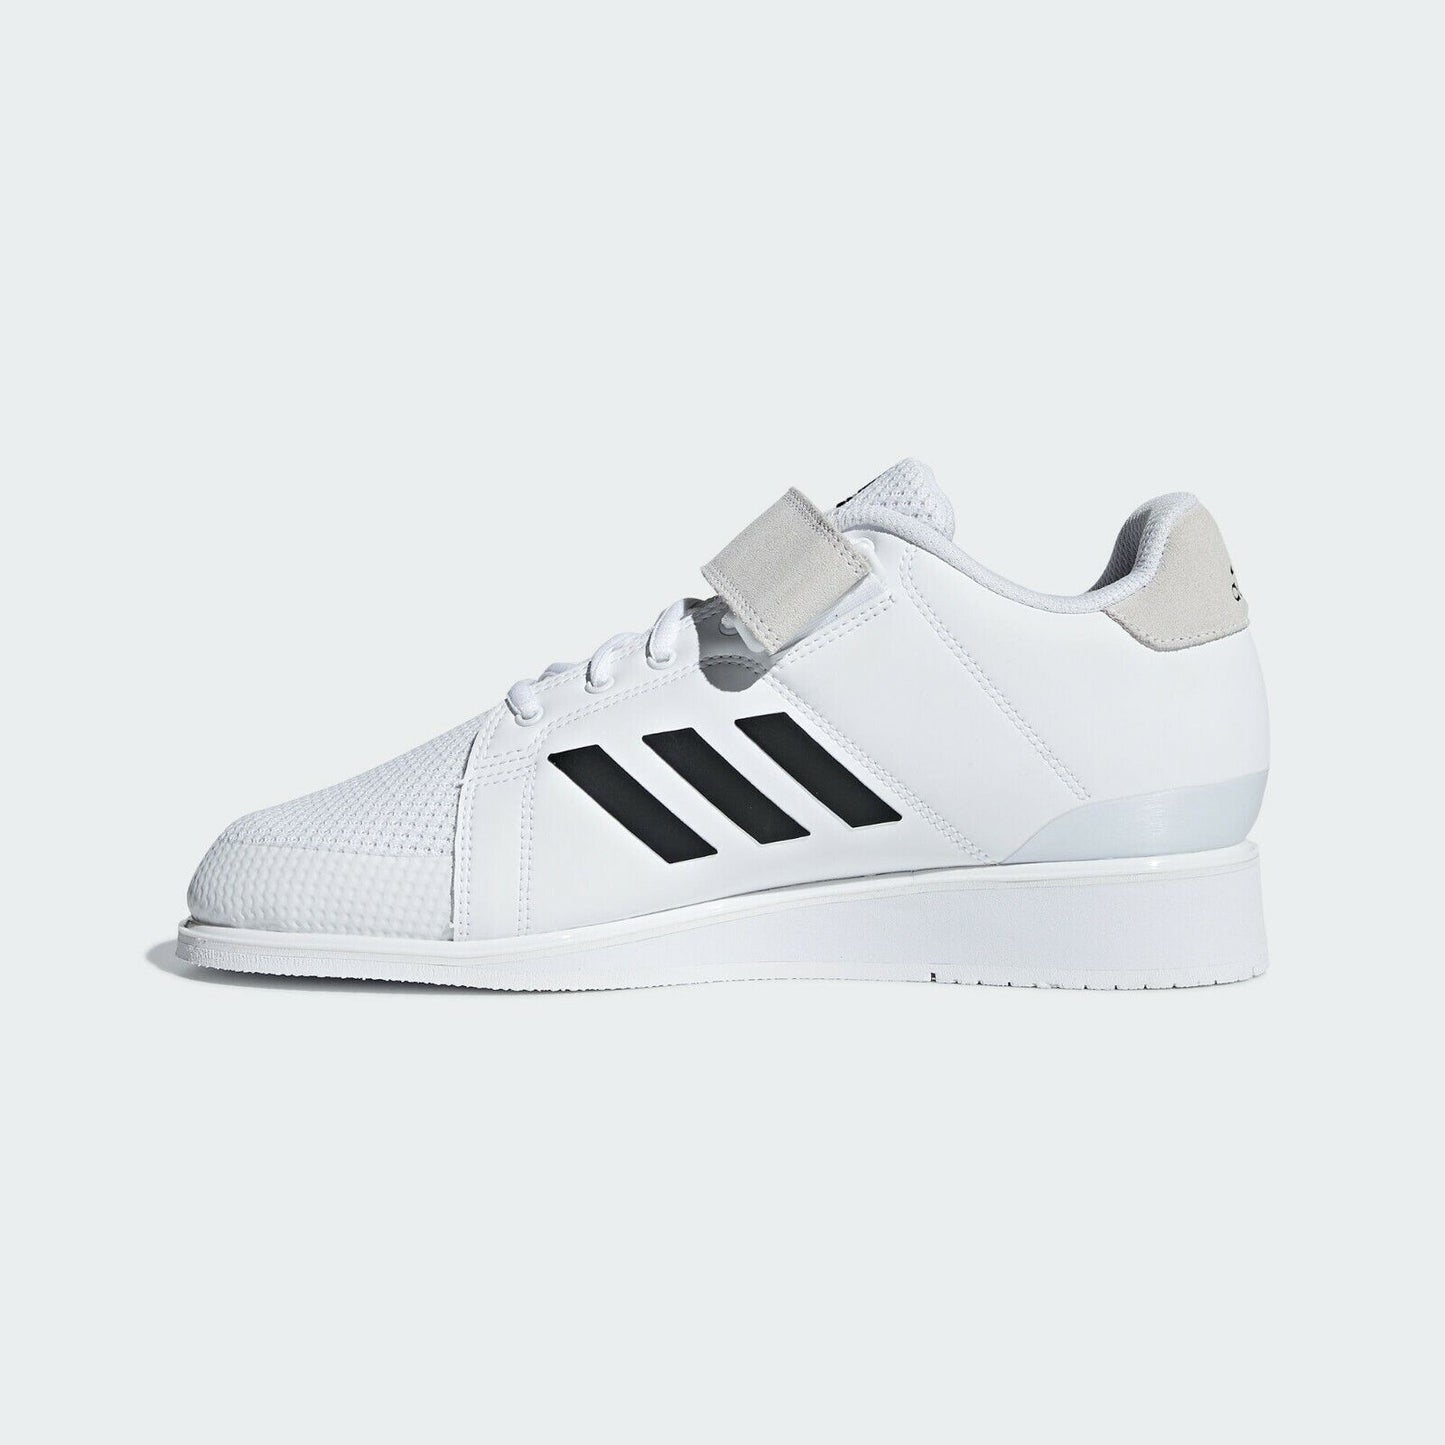 adidas Power Perfect 3 Mens Weightlifting Shoes - White